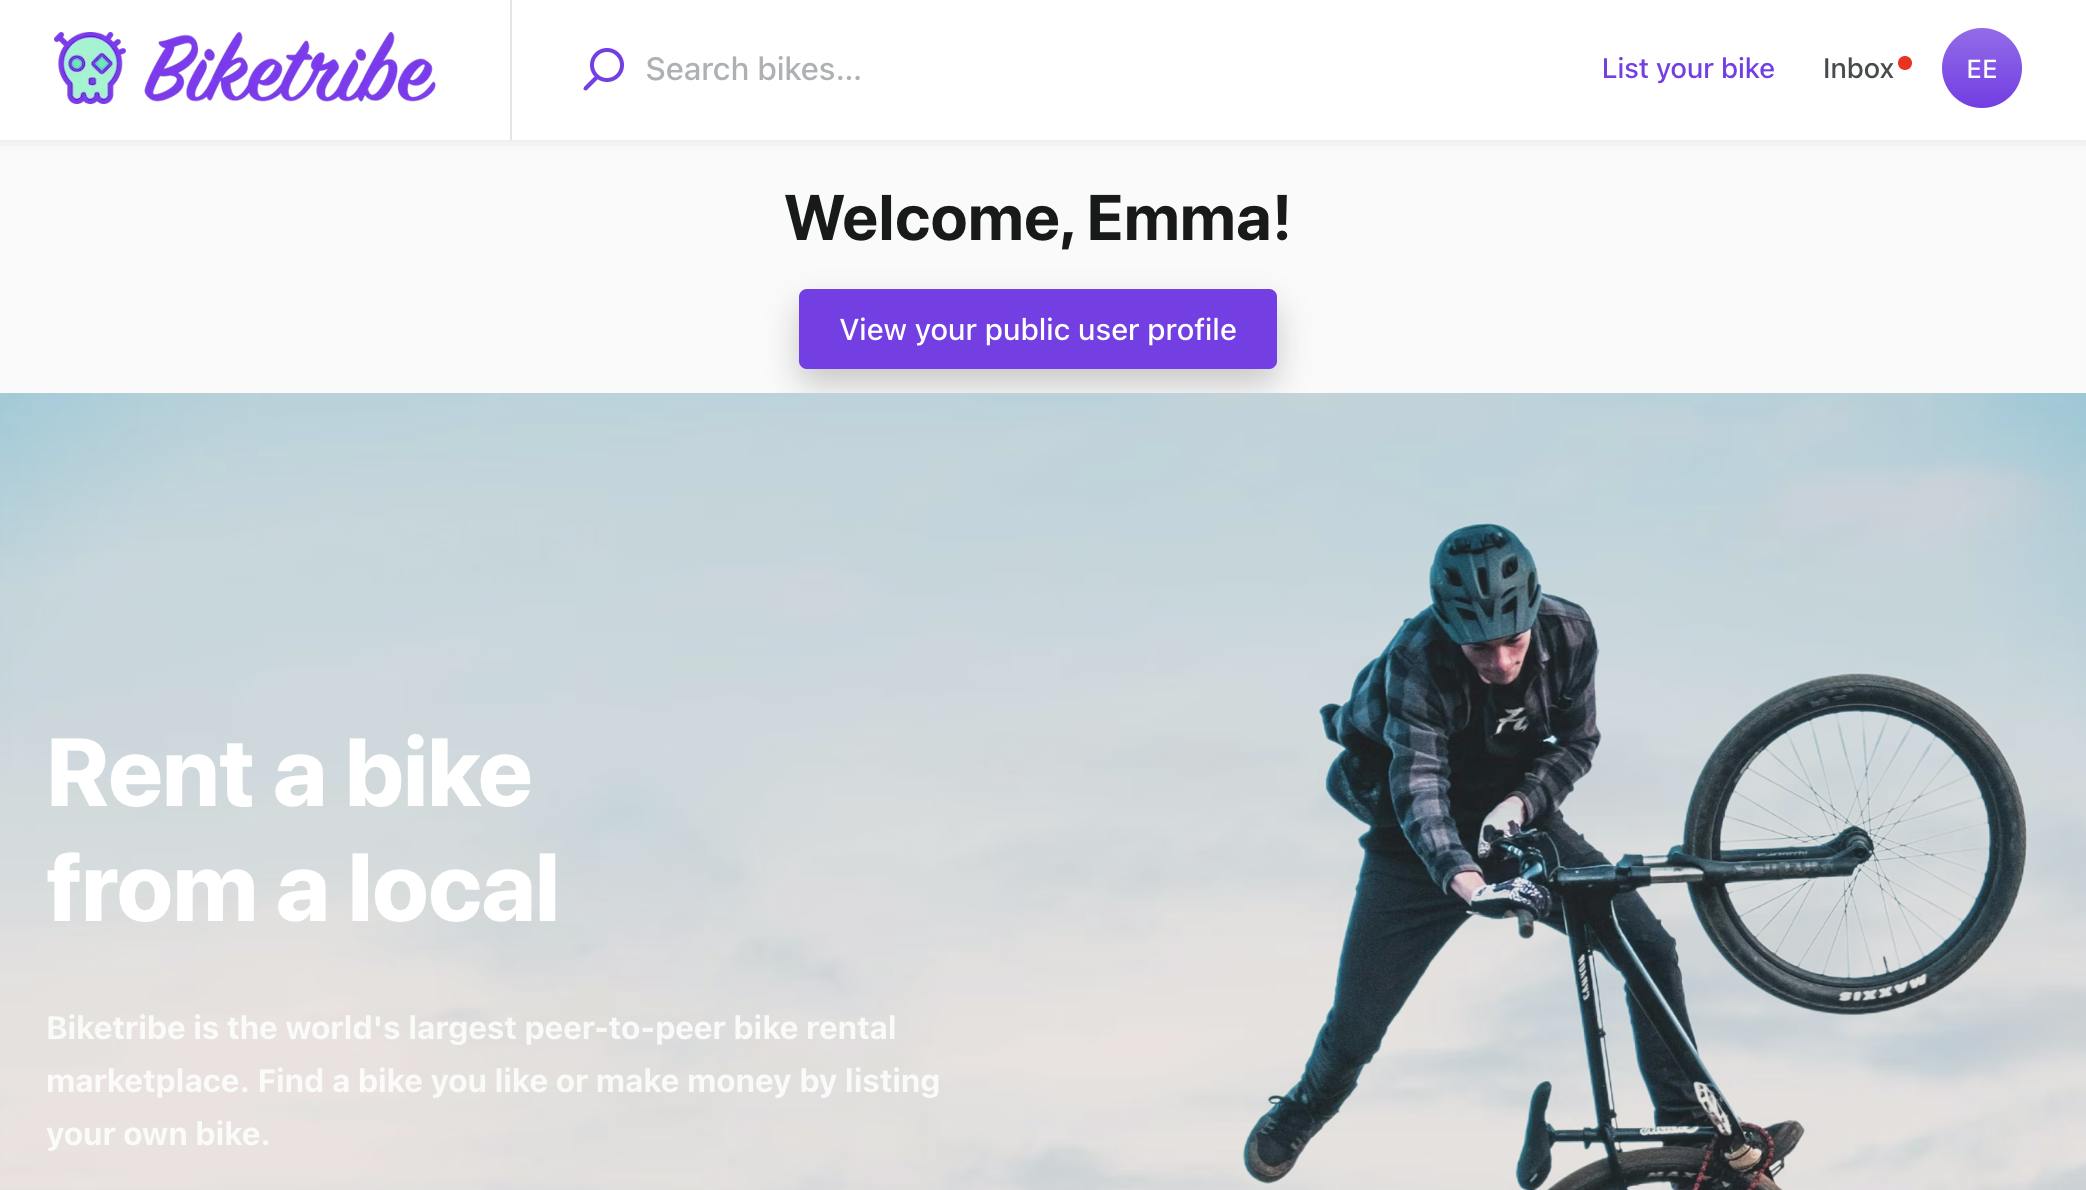 A fictional bike marketplace landing page with a section where on white background, there is a title "Welcome, Emma"! and a button with text "View your public user profile". Under this section, there is a large image of a person doing a bicycle trick and a text "Rent a bike from a local".